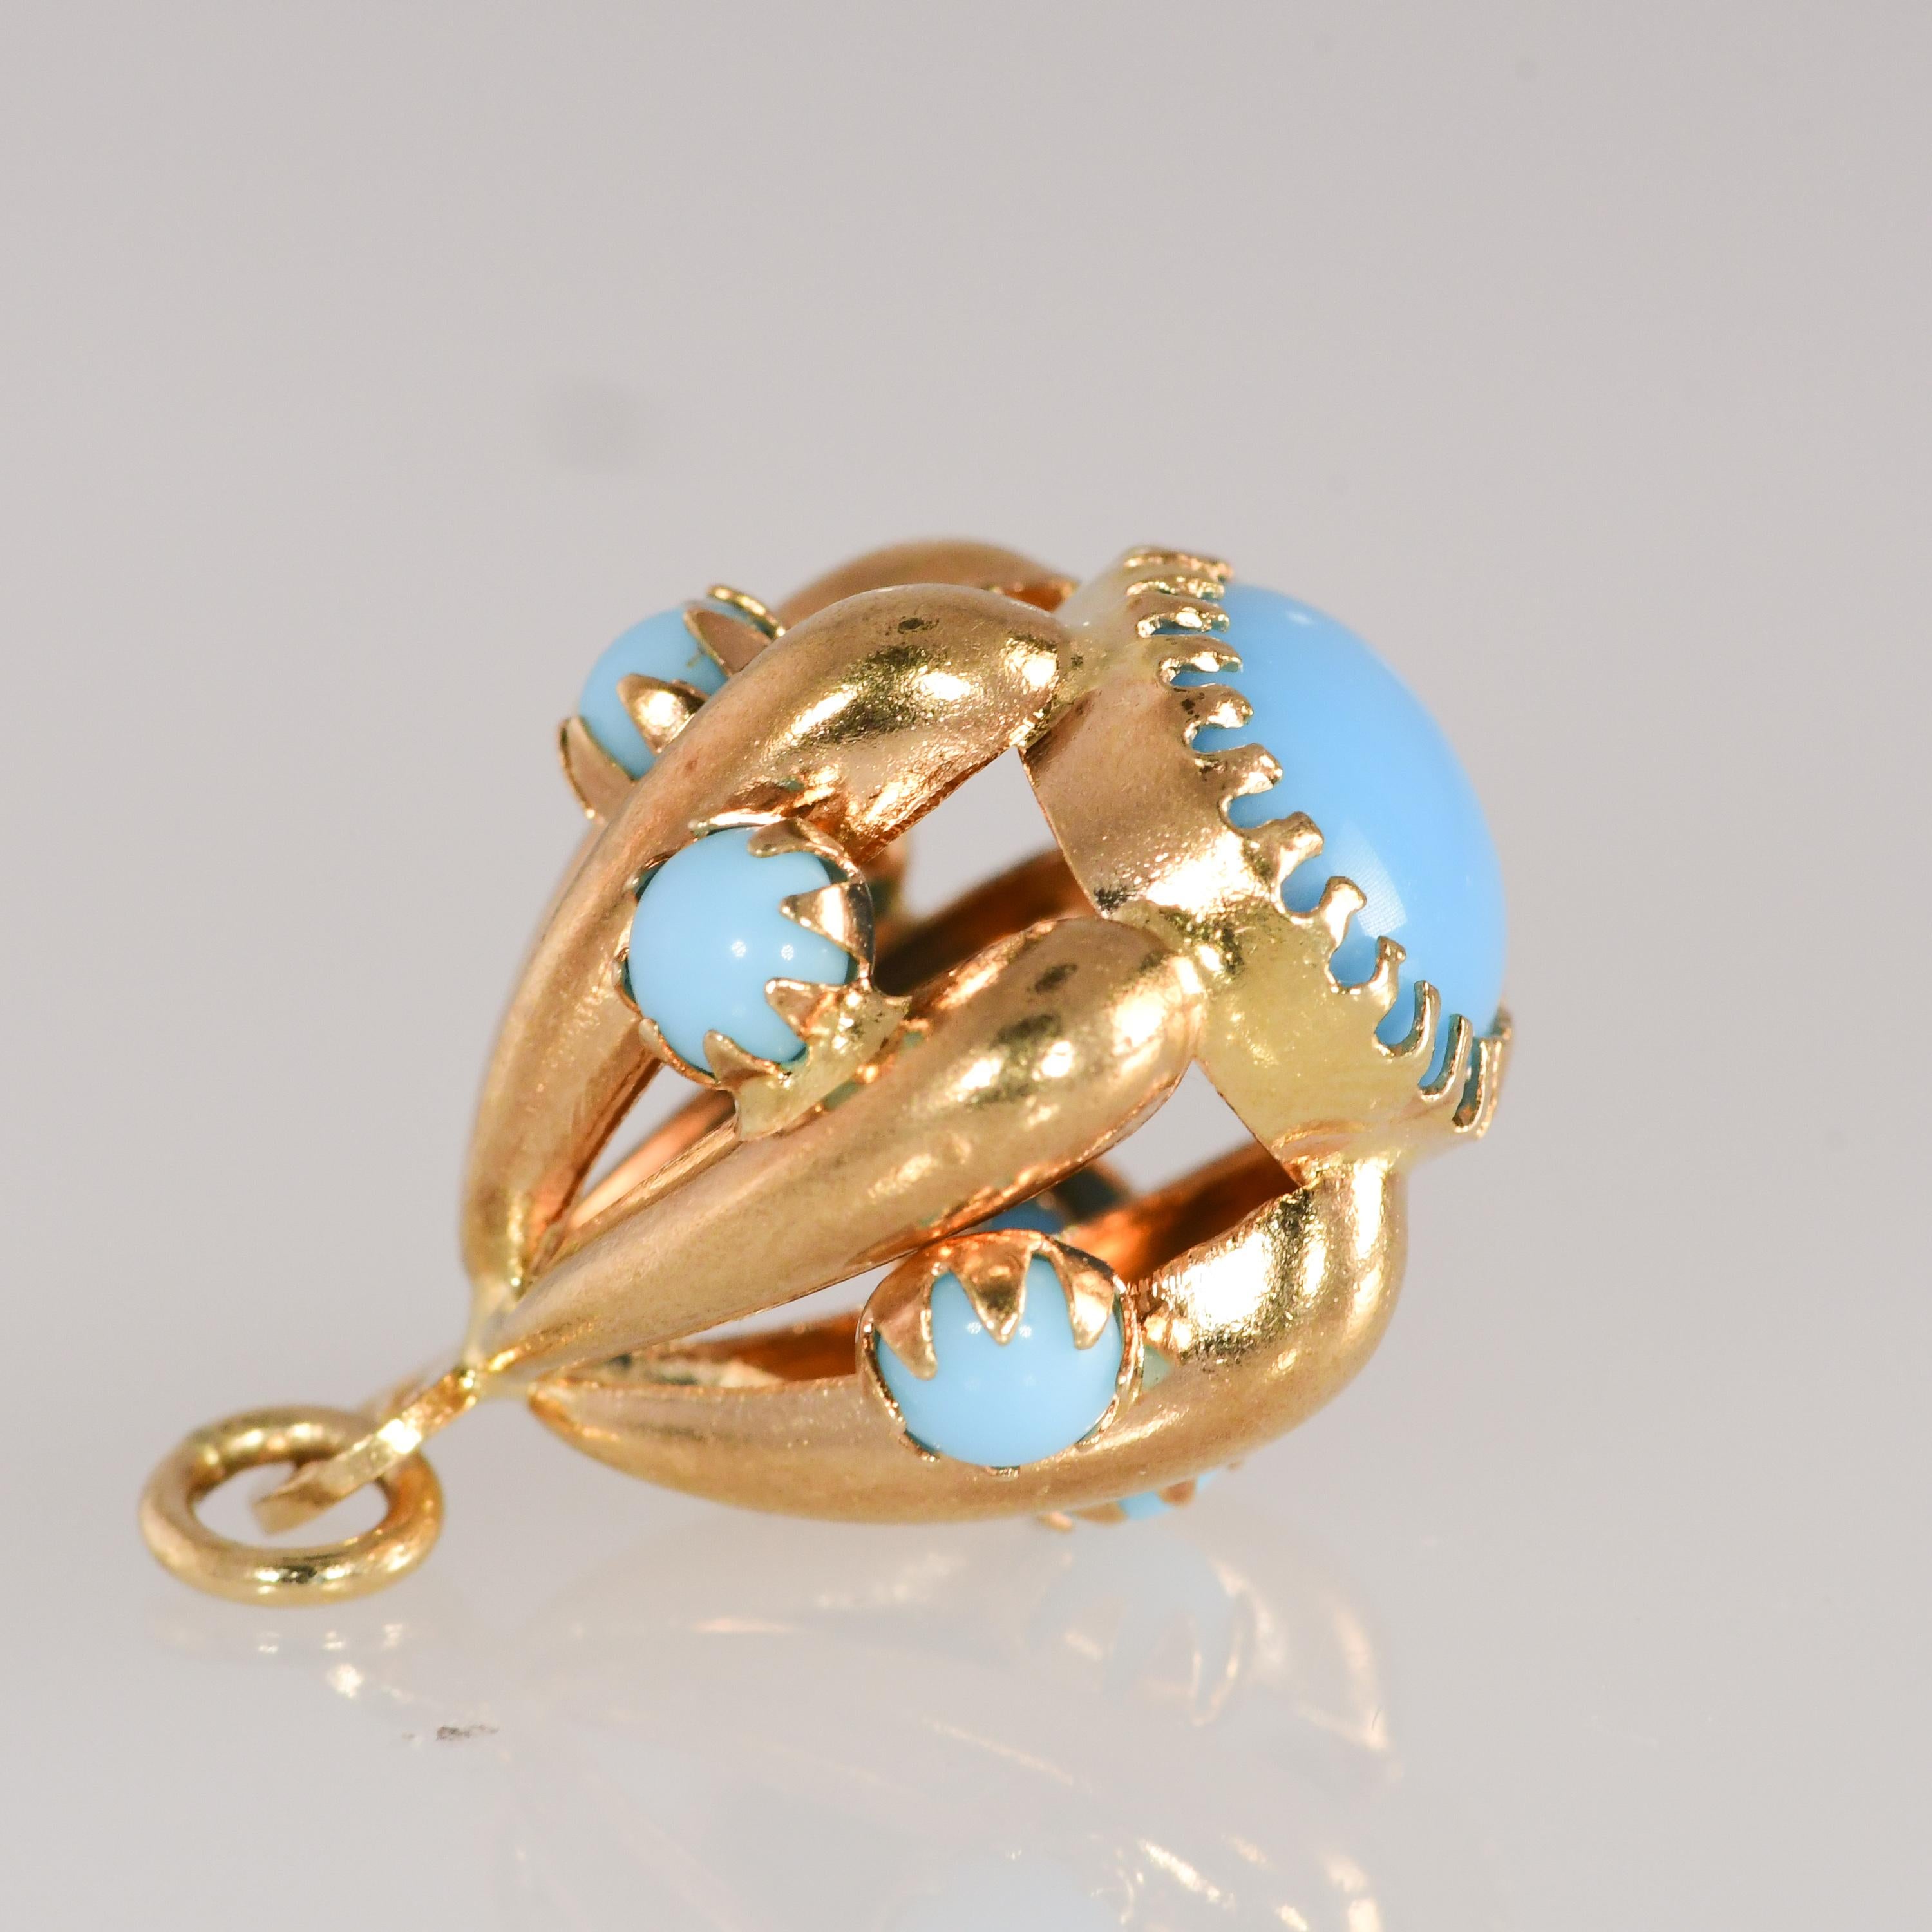 Oval Cut Vintage Three-Dimensional Natural Turquoise Gold 18 Karat Charm or Pendant